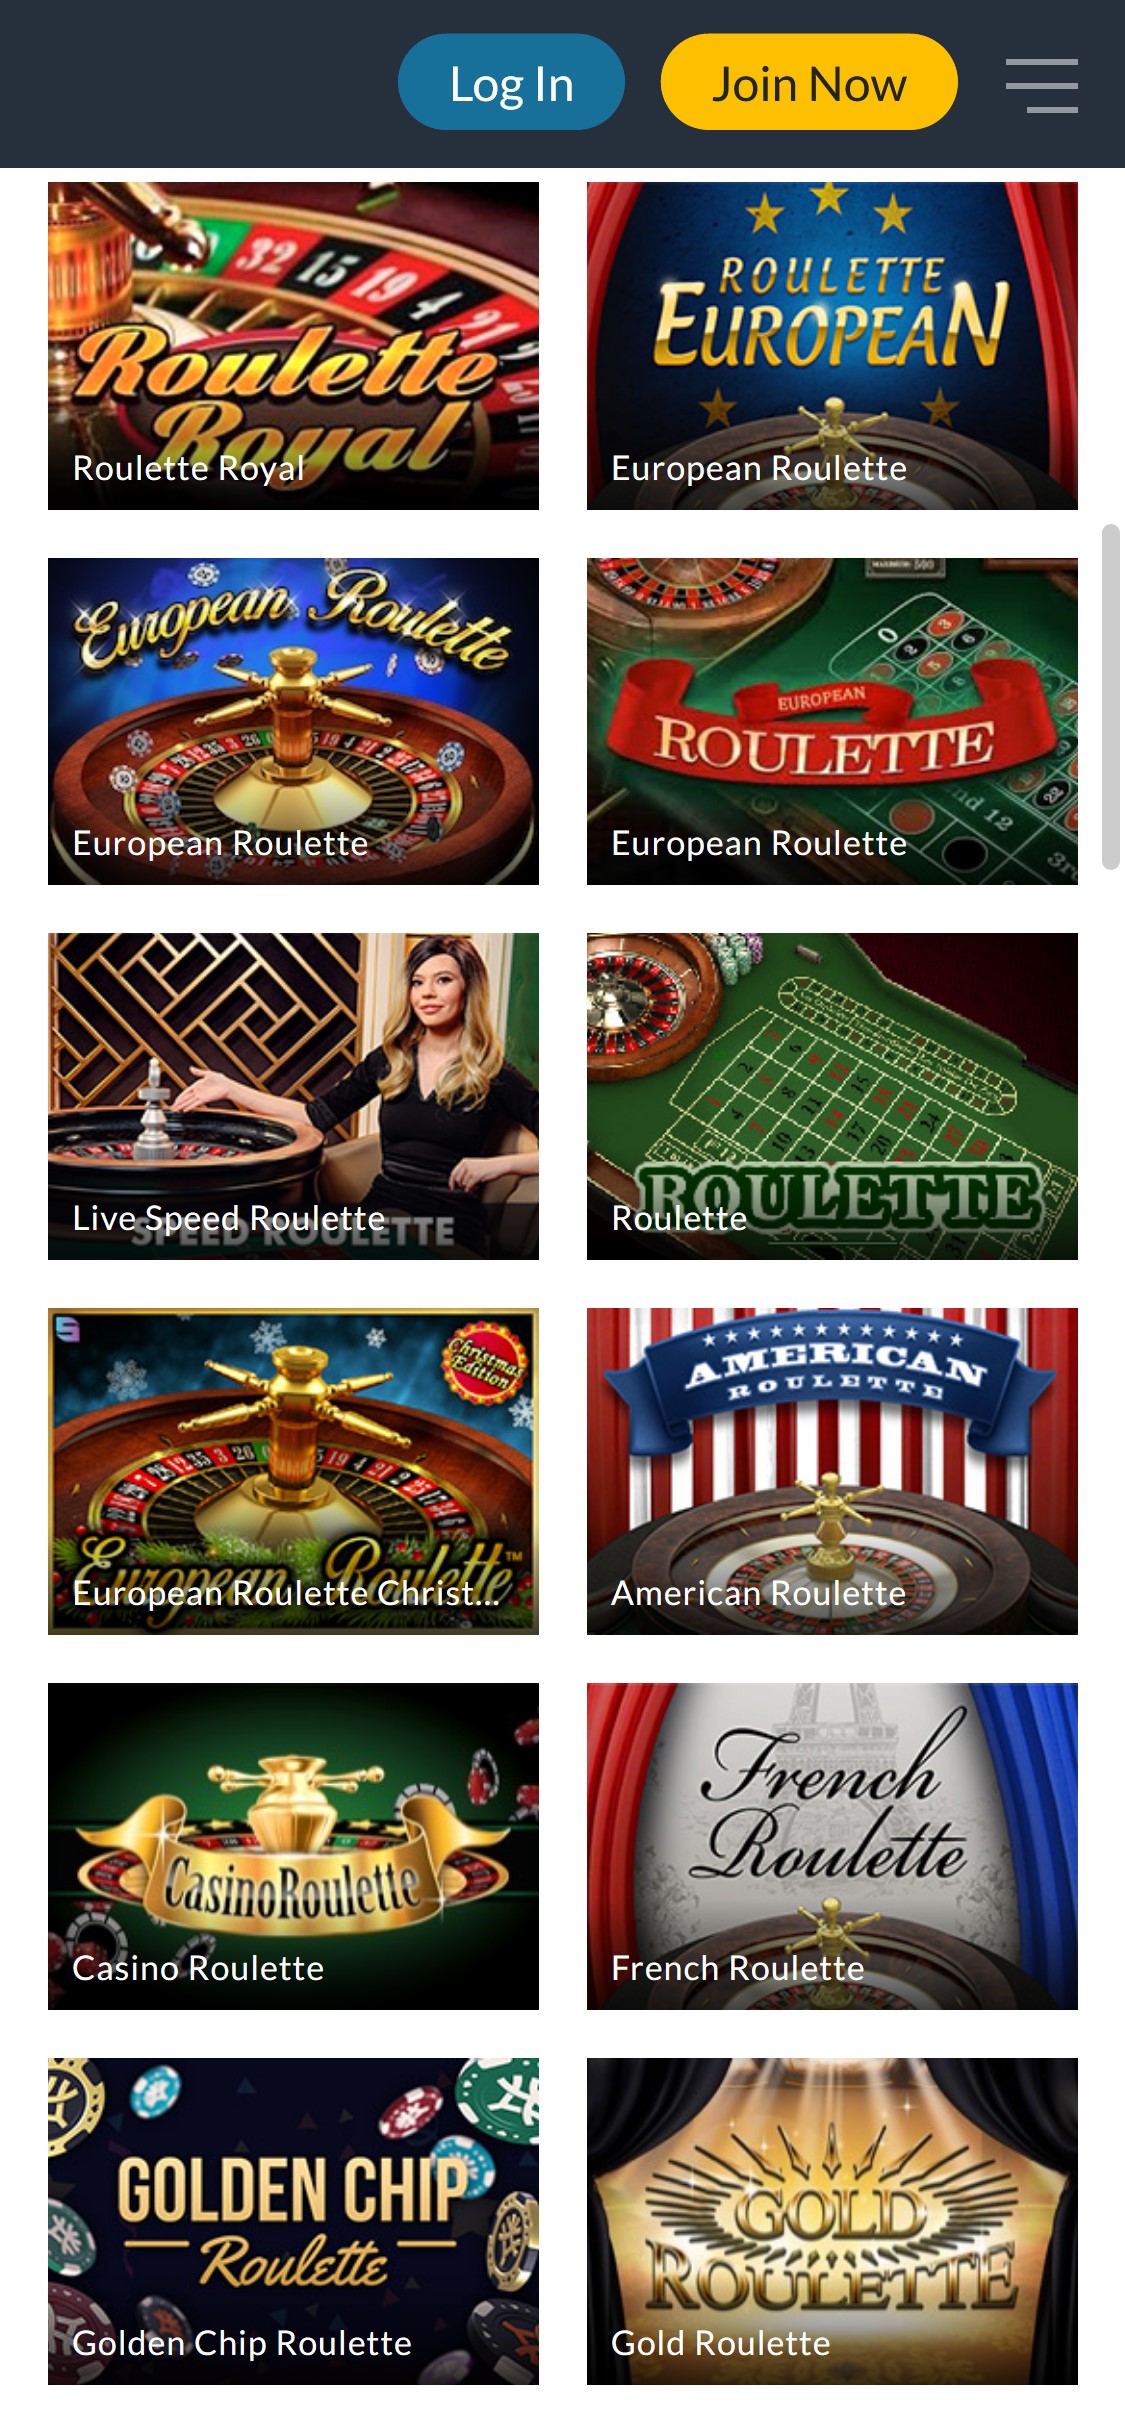 Power Casino Mobile Games Review